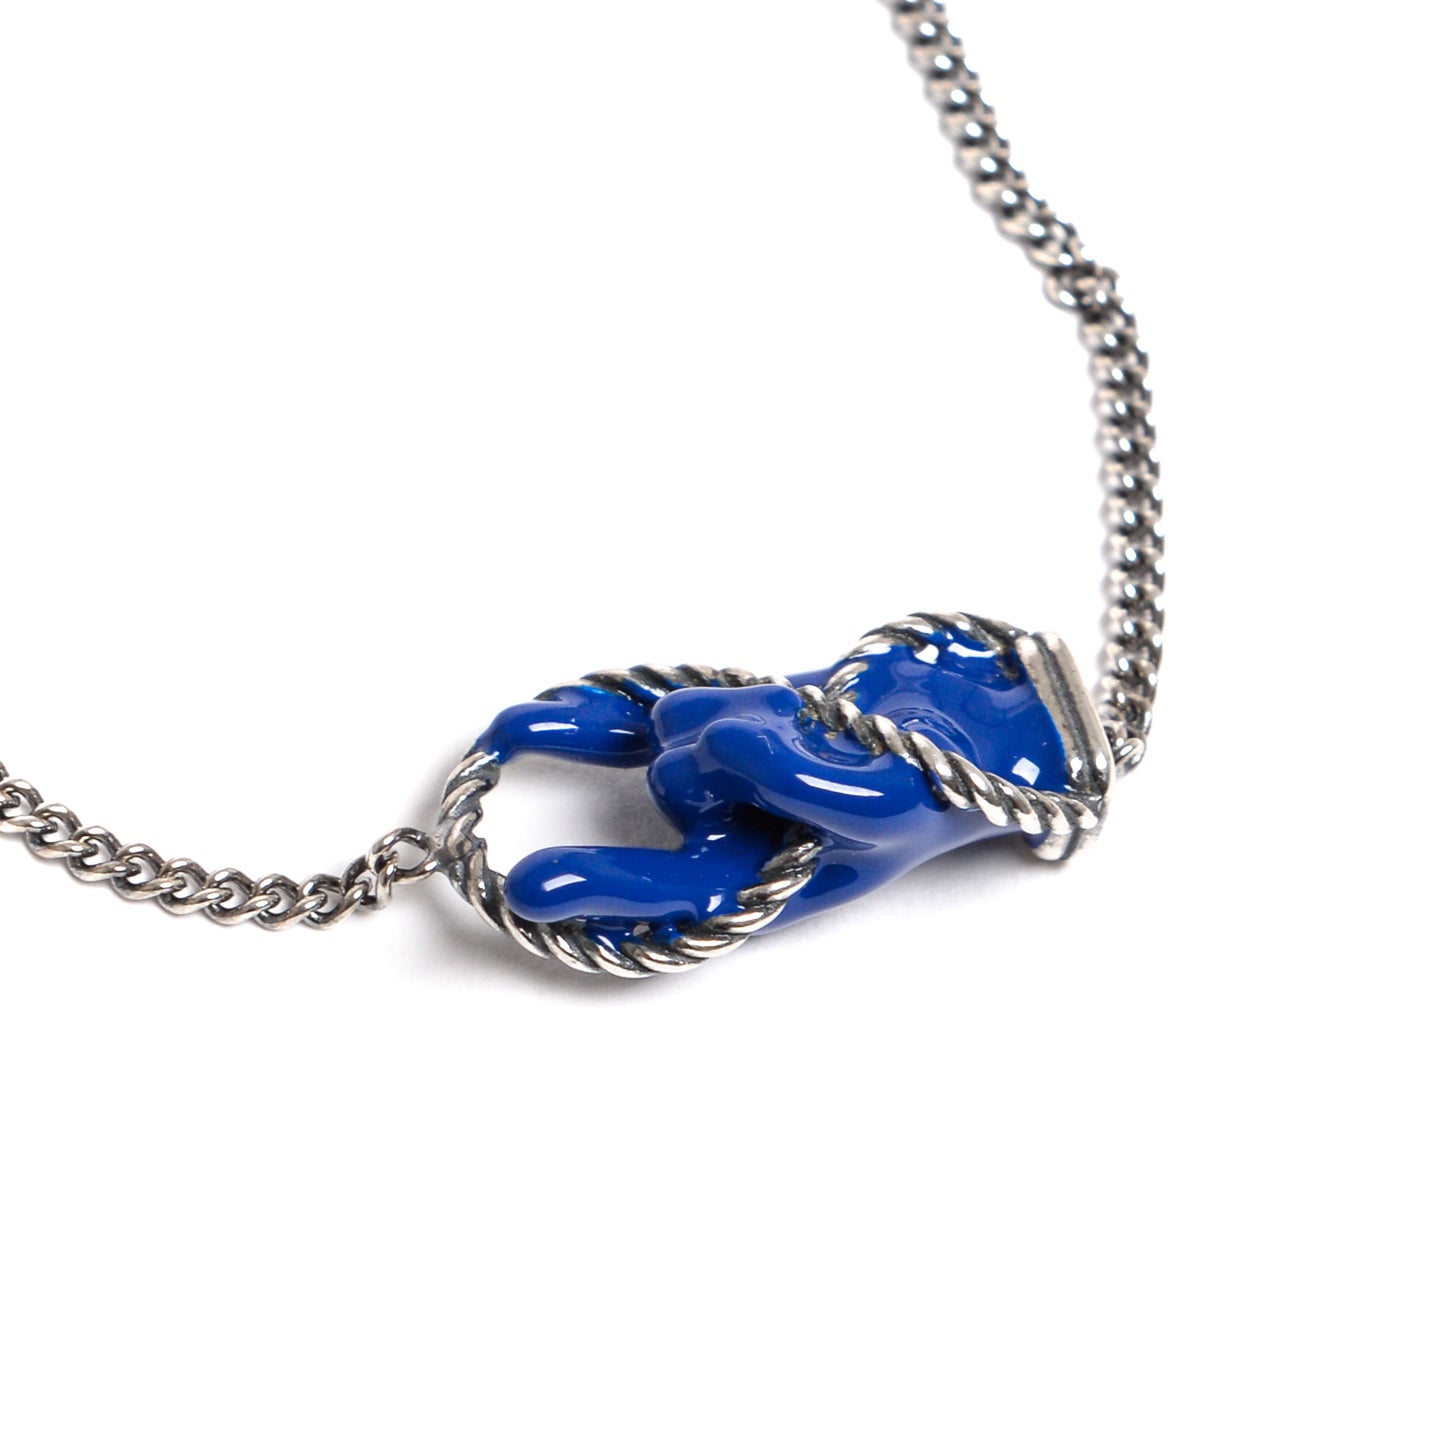 Chain Bracelet with Blue Lacquered "Horn"